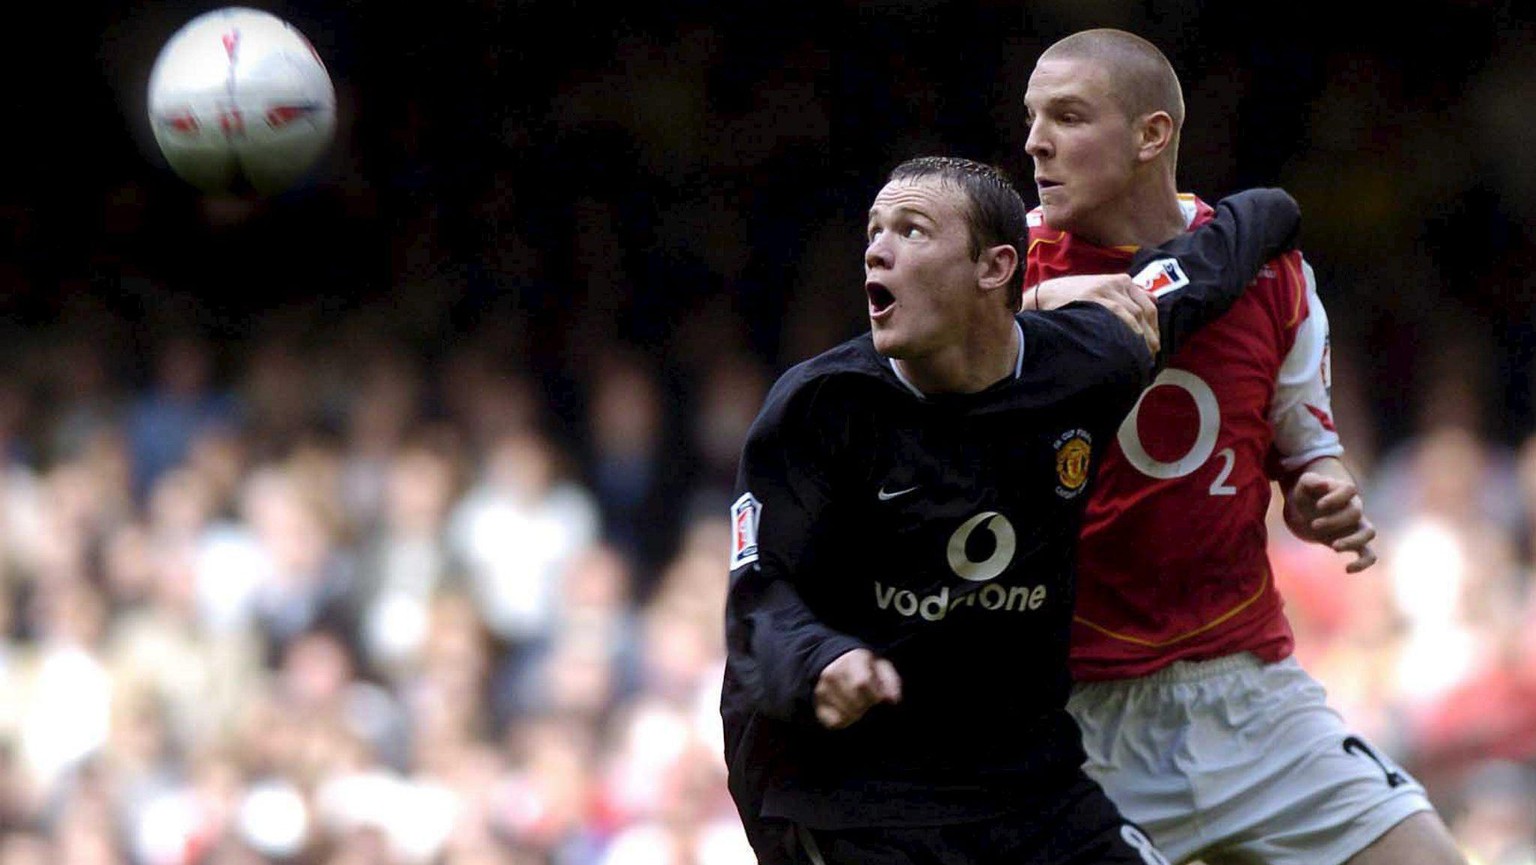 Wayne Rooney (L) of Manchester United battles with Philippe Senderos of Arsenal, 21 May 2005, during the Arsenal v Manchester United FA Cup Final at the Millennium Stadium, Cardiff, Wales, United King ...